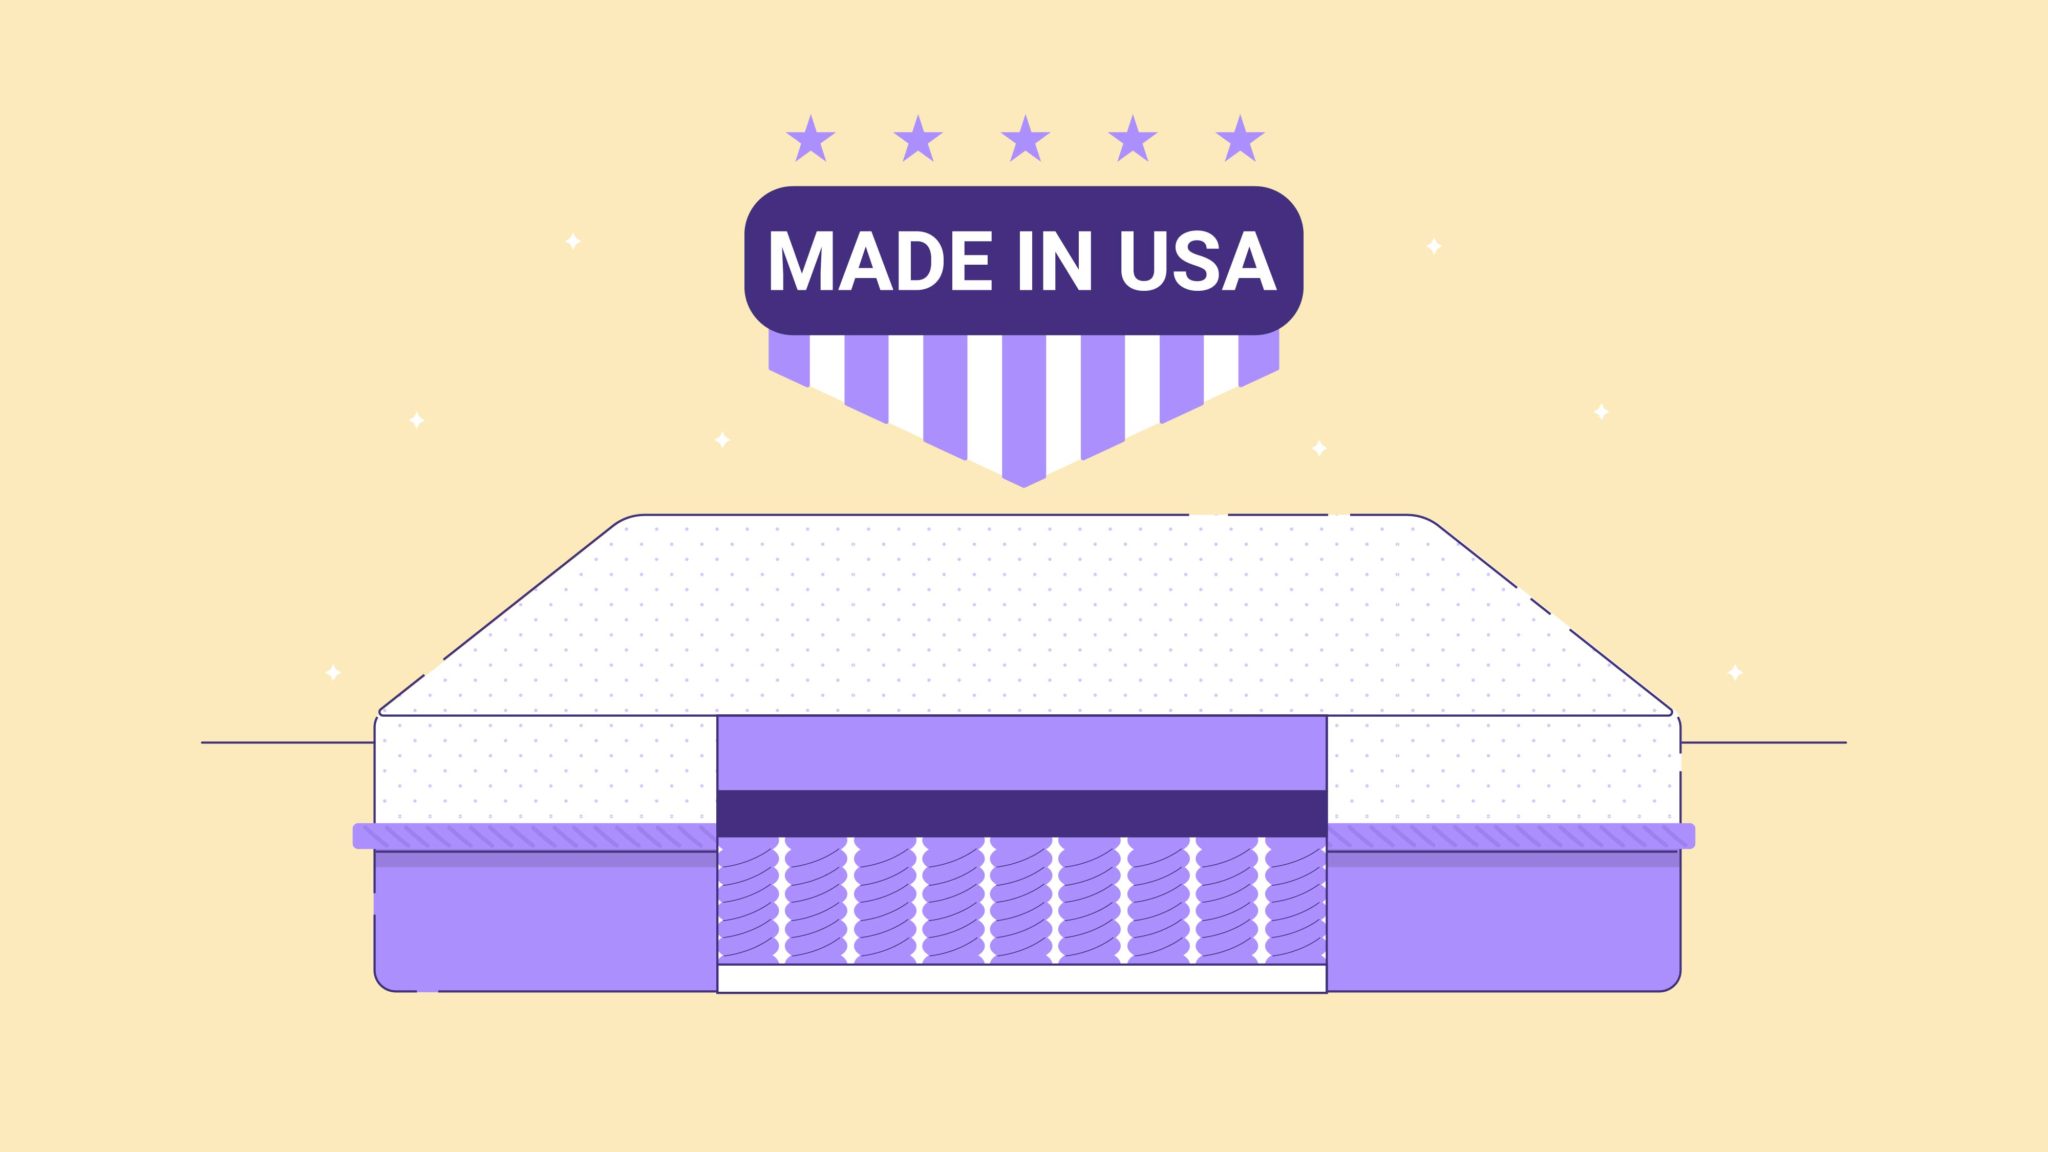 hybrid mattress made in the usa